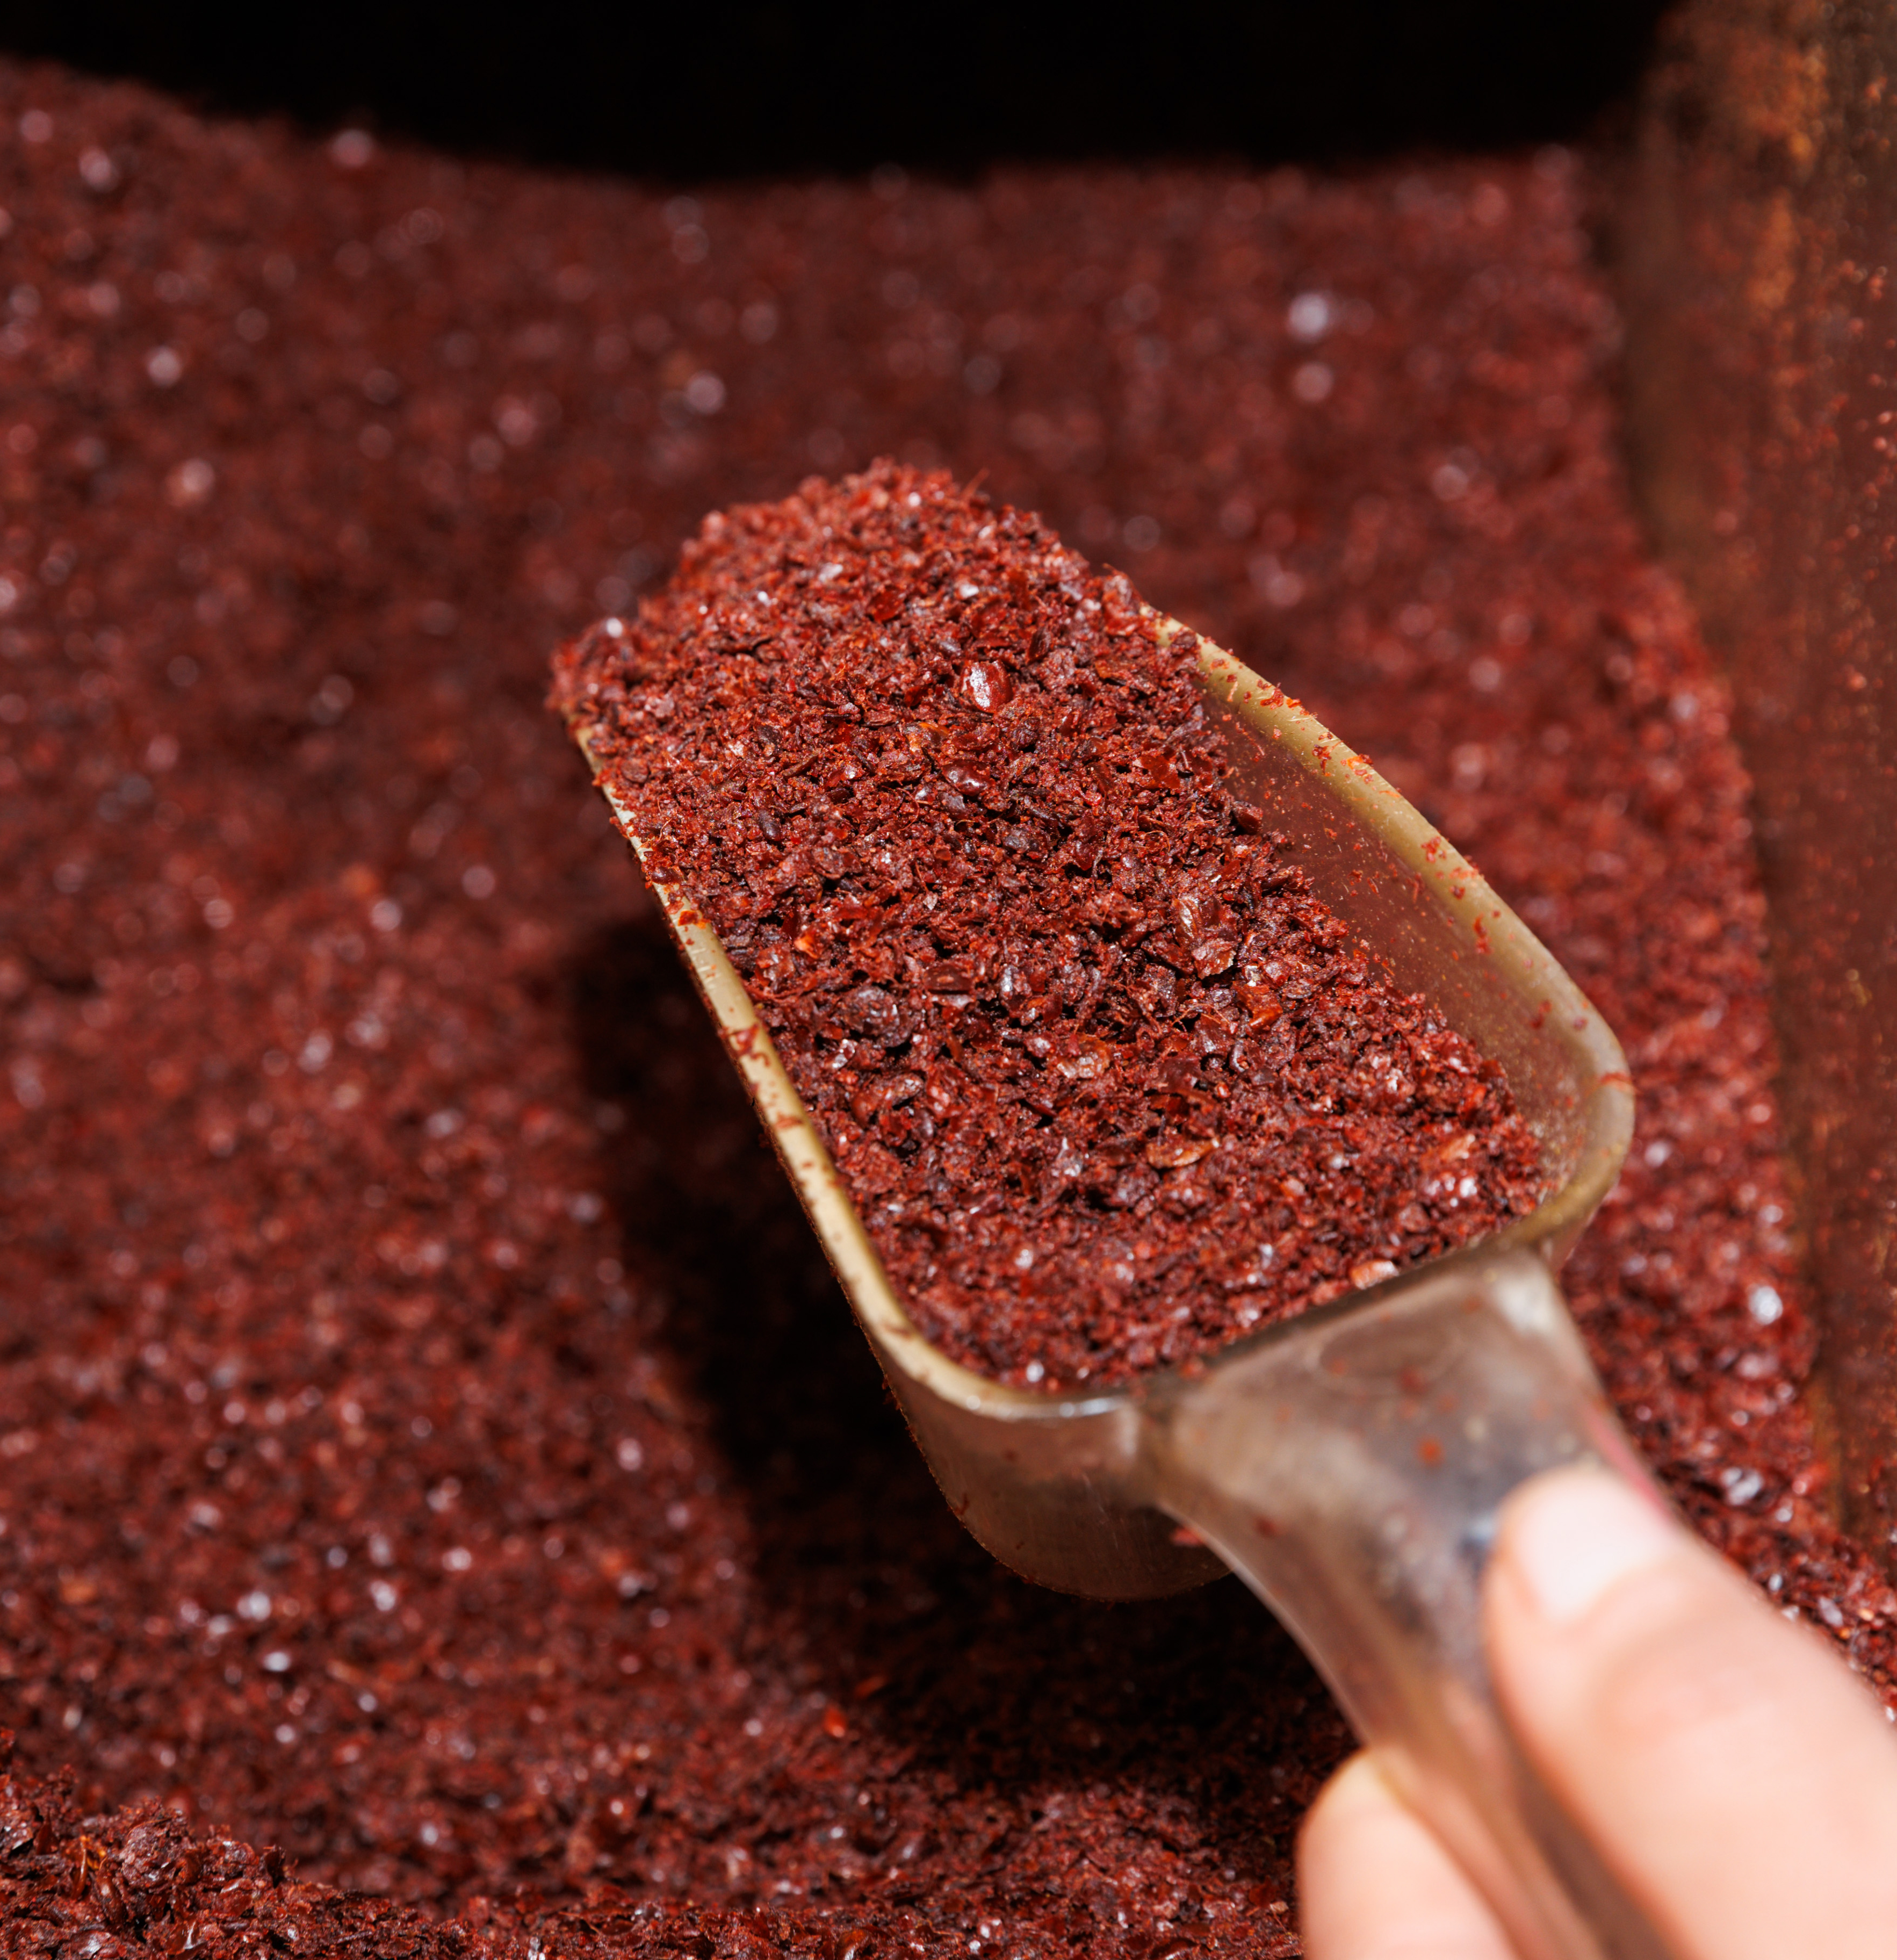 A hand holds a scoop filled with a coarse, dark red spice or ground substance, with a larger pile of the same red material in the background.